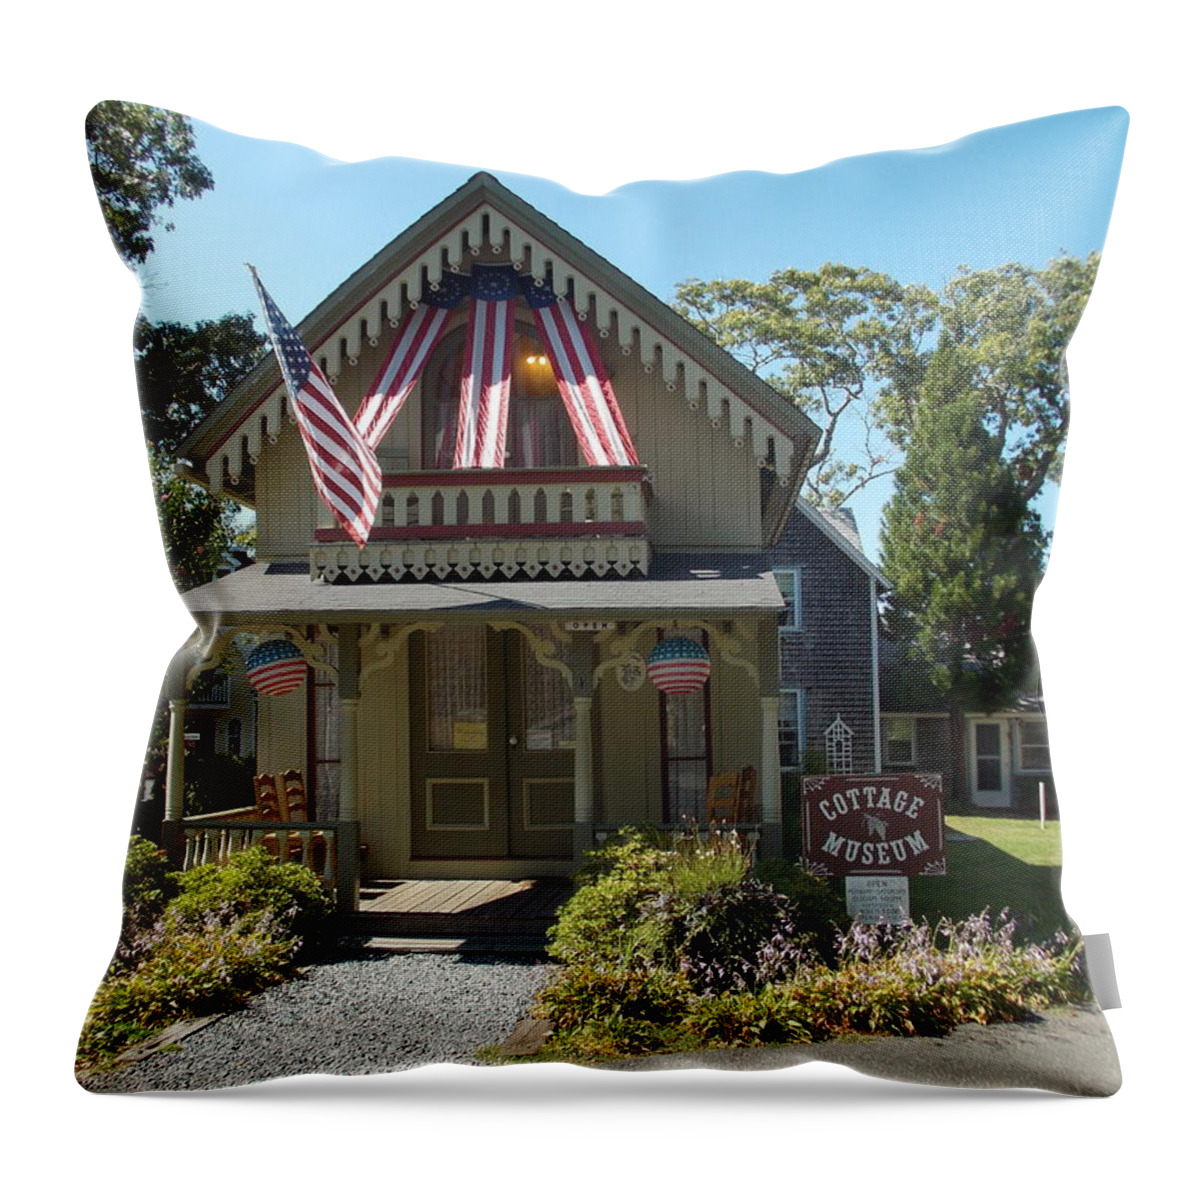 New England Throw Pillow featuring the photograph Cottage Musuem by Catherine Gagne